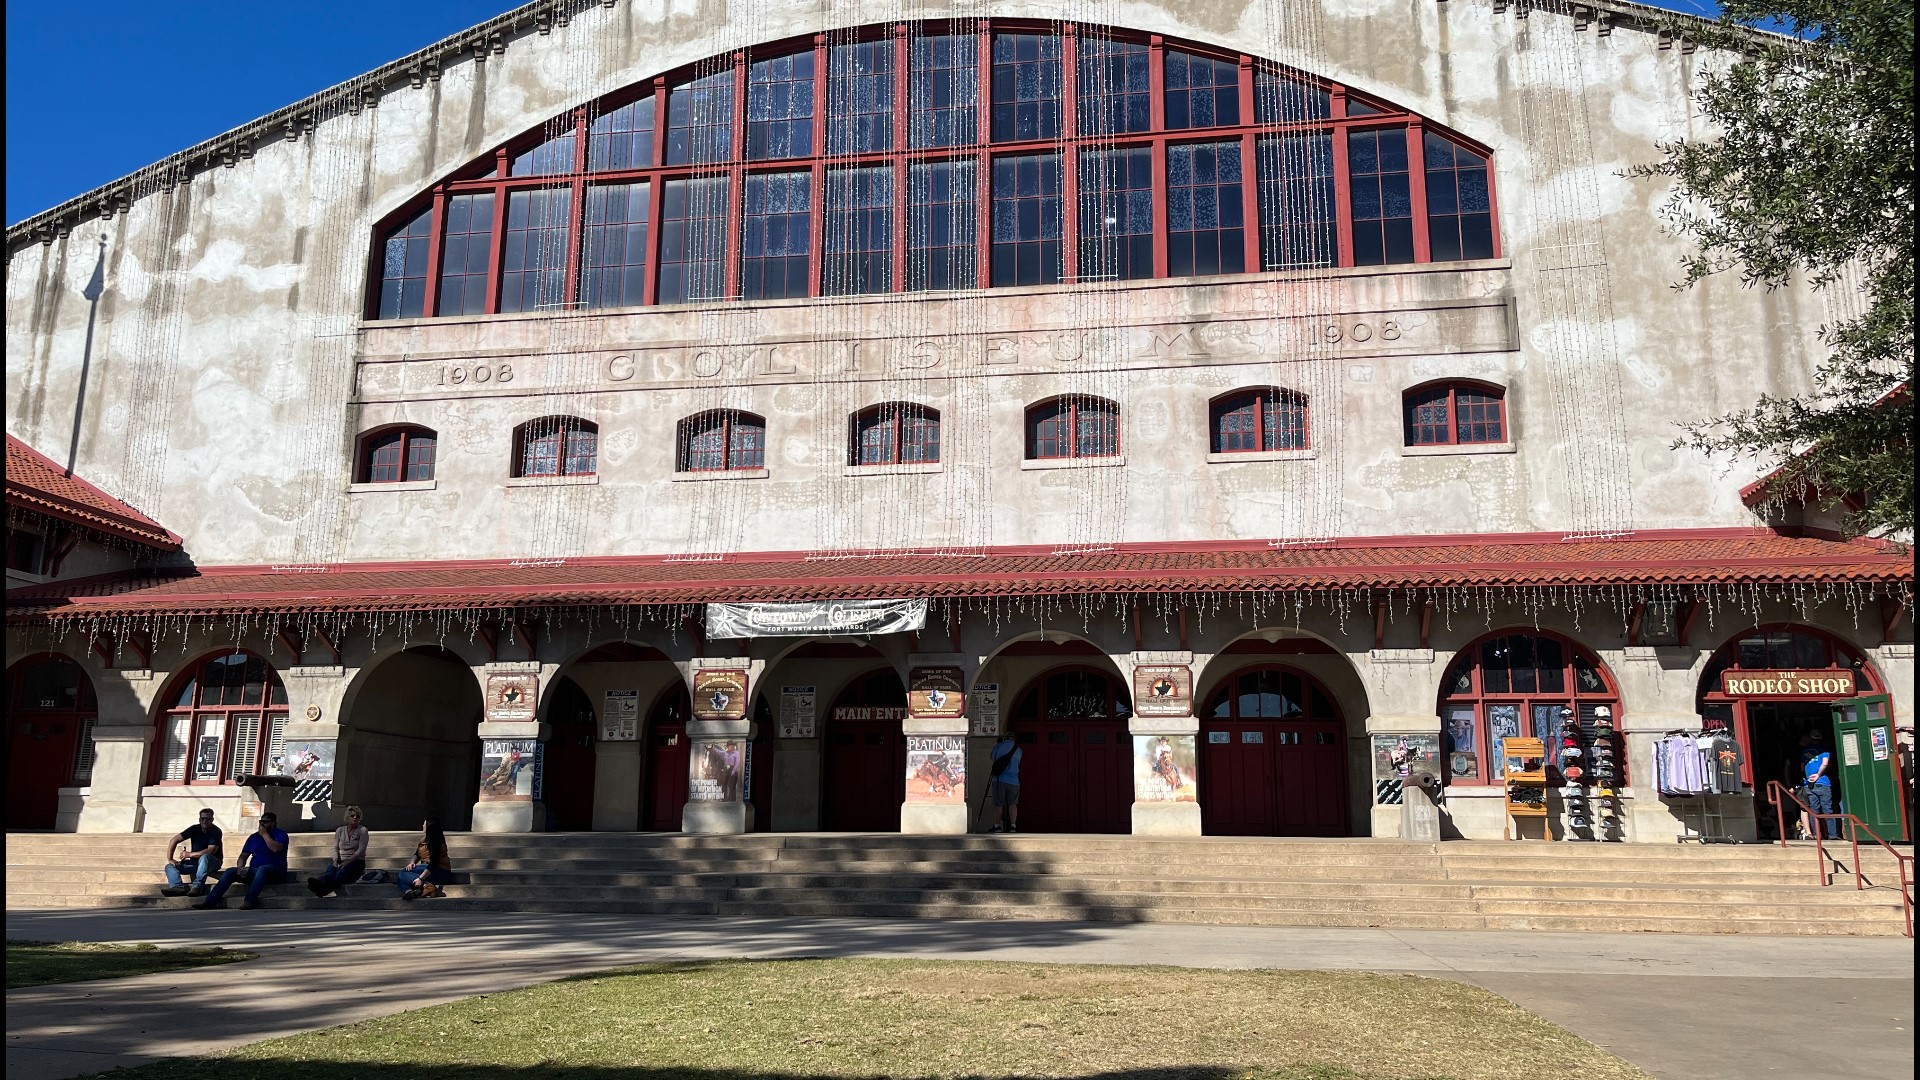 The Dallas Business Journal says Gateway Studios & Production Services recently added a series of improvements to the stadium originally built in 1908.